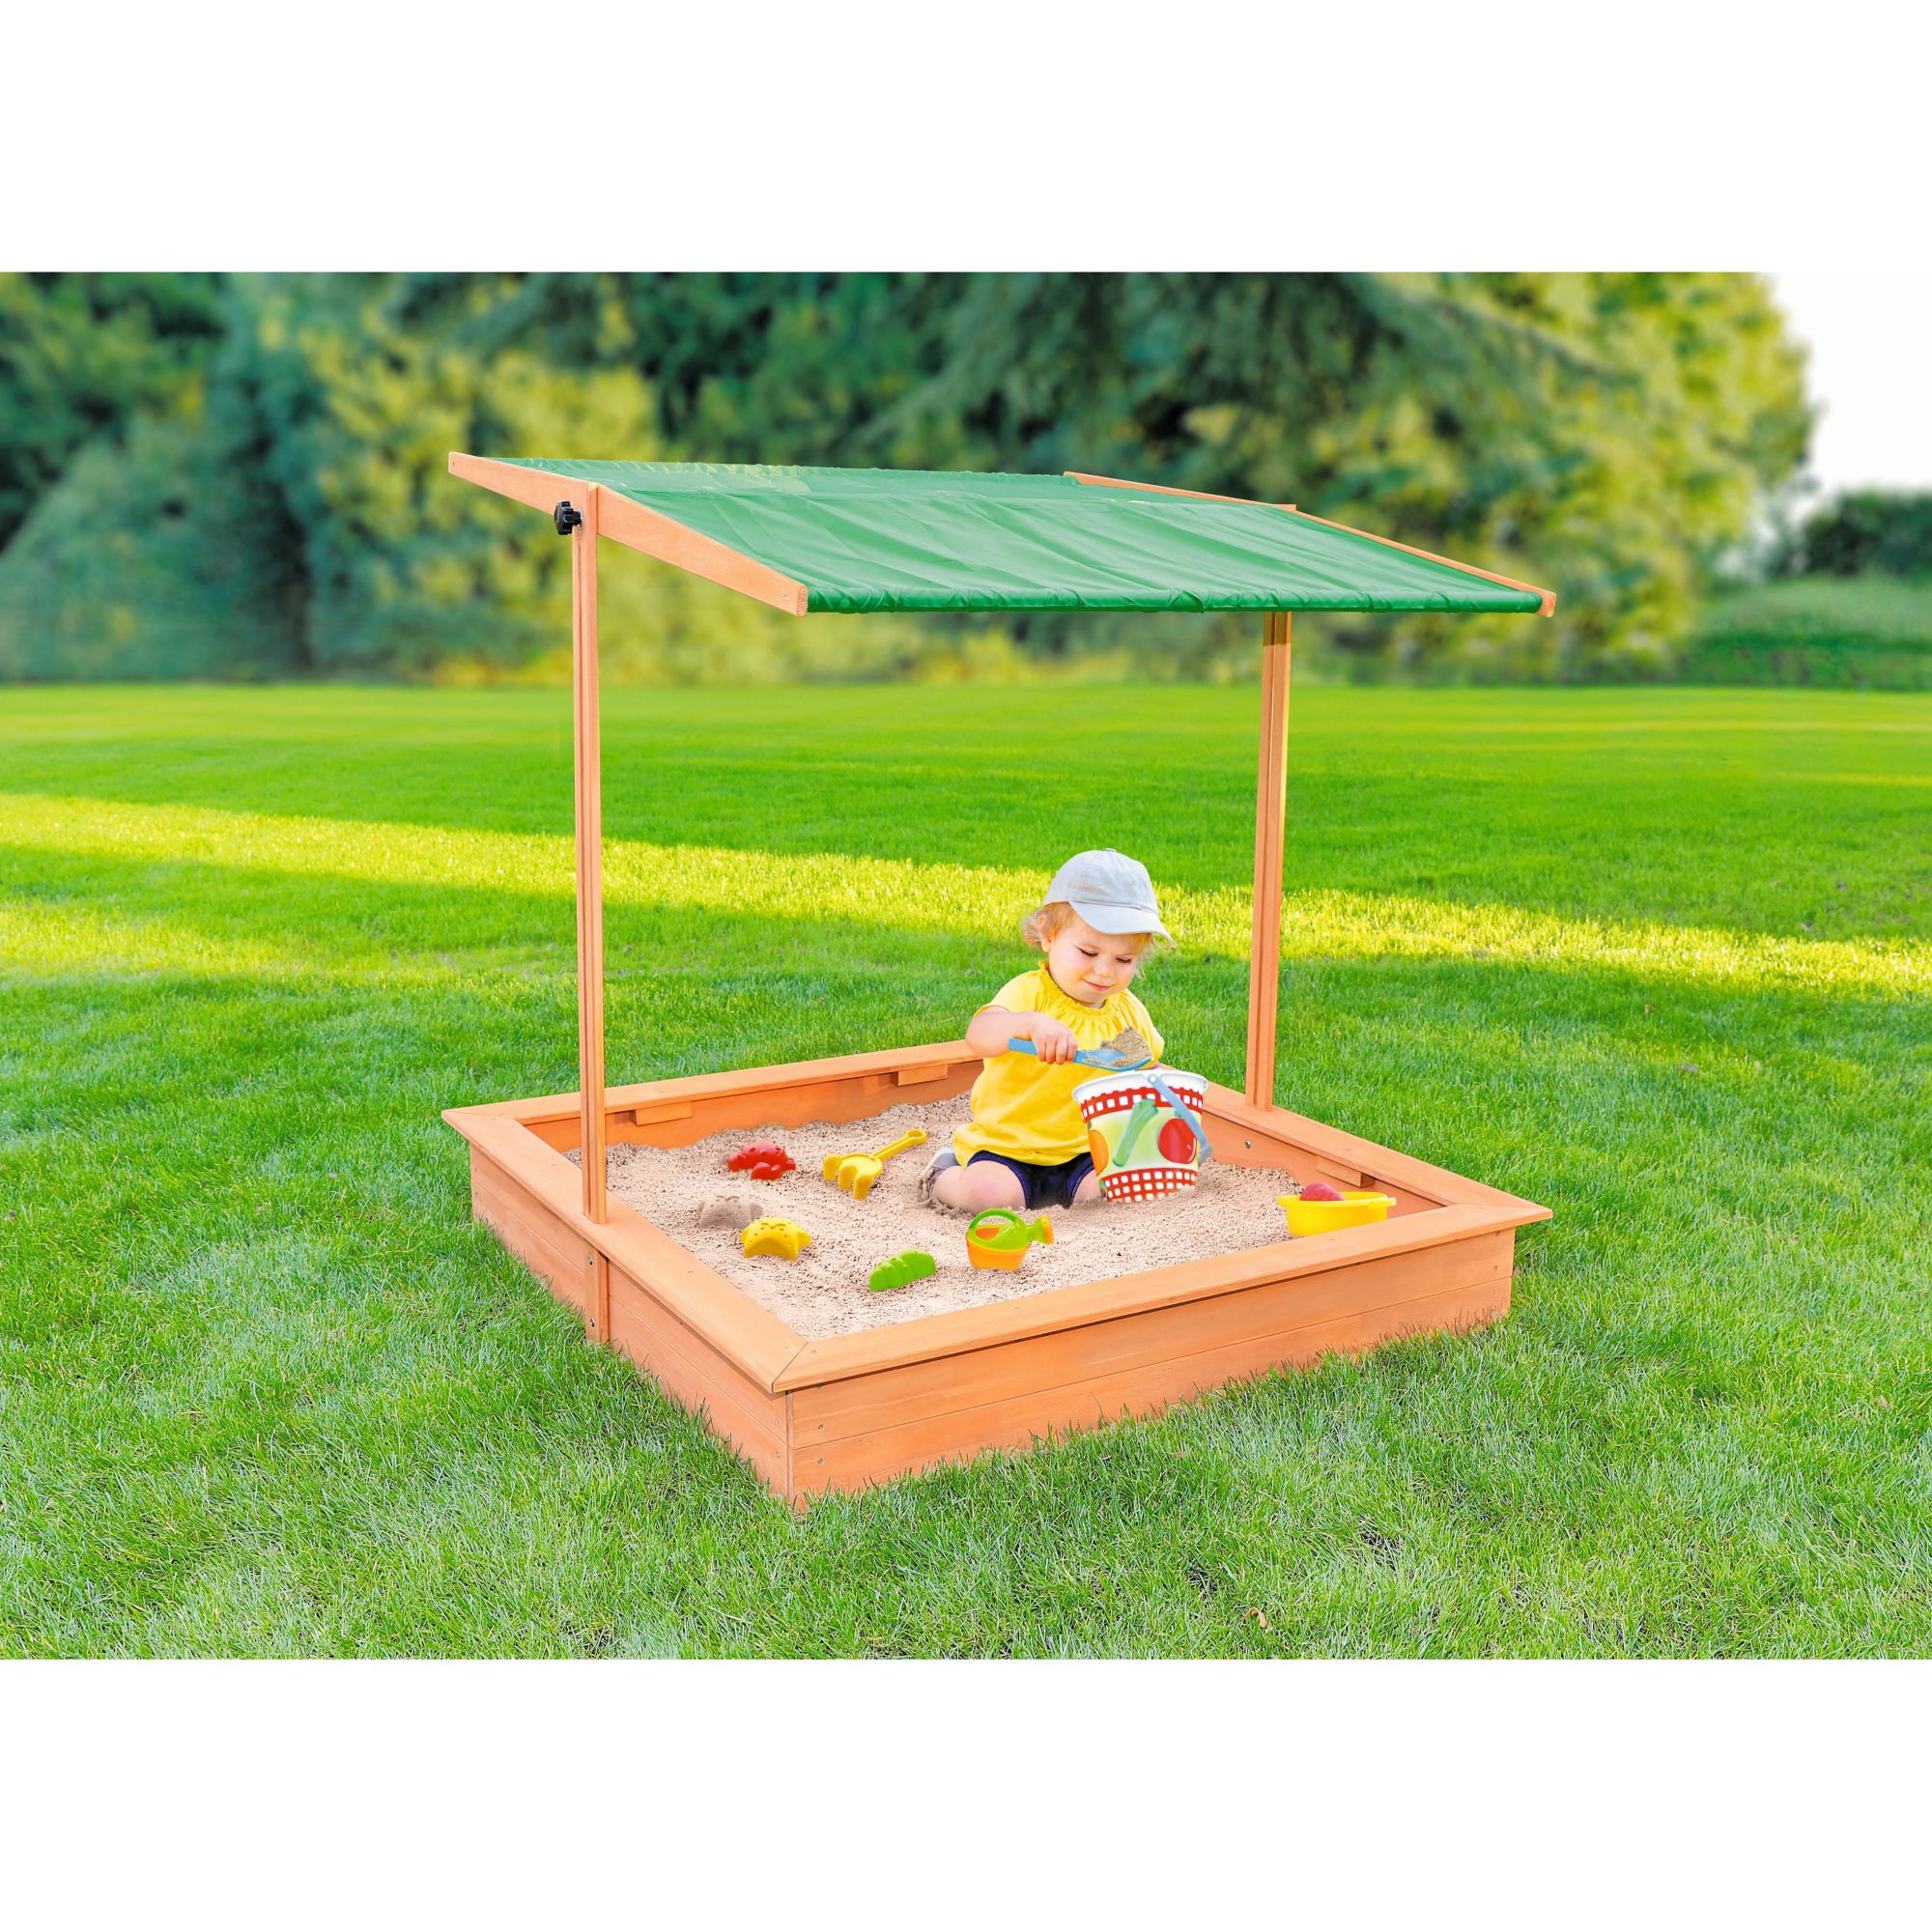 Jupiter Workshops Wooden Sandbox with Fabric Canopy Roof